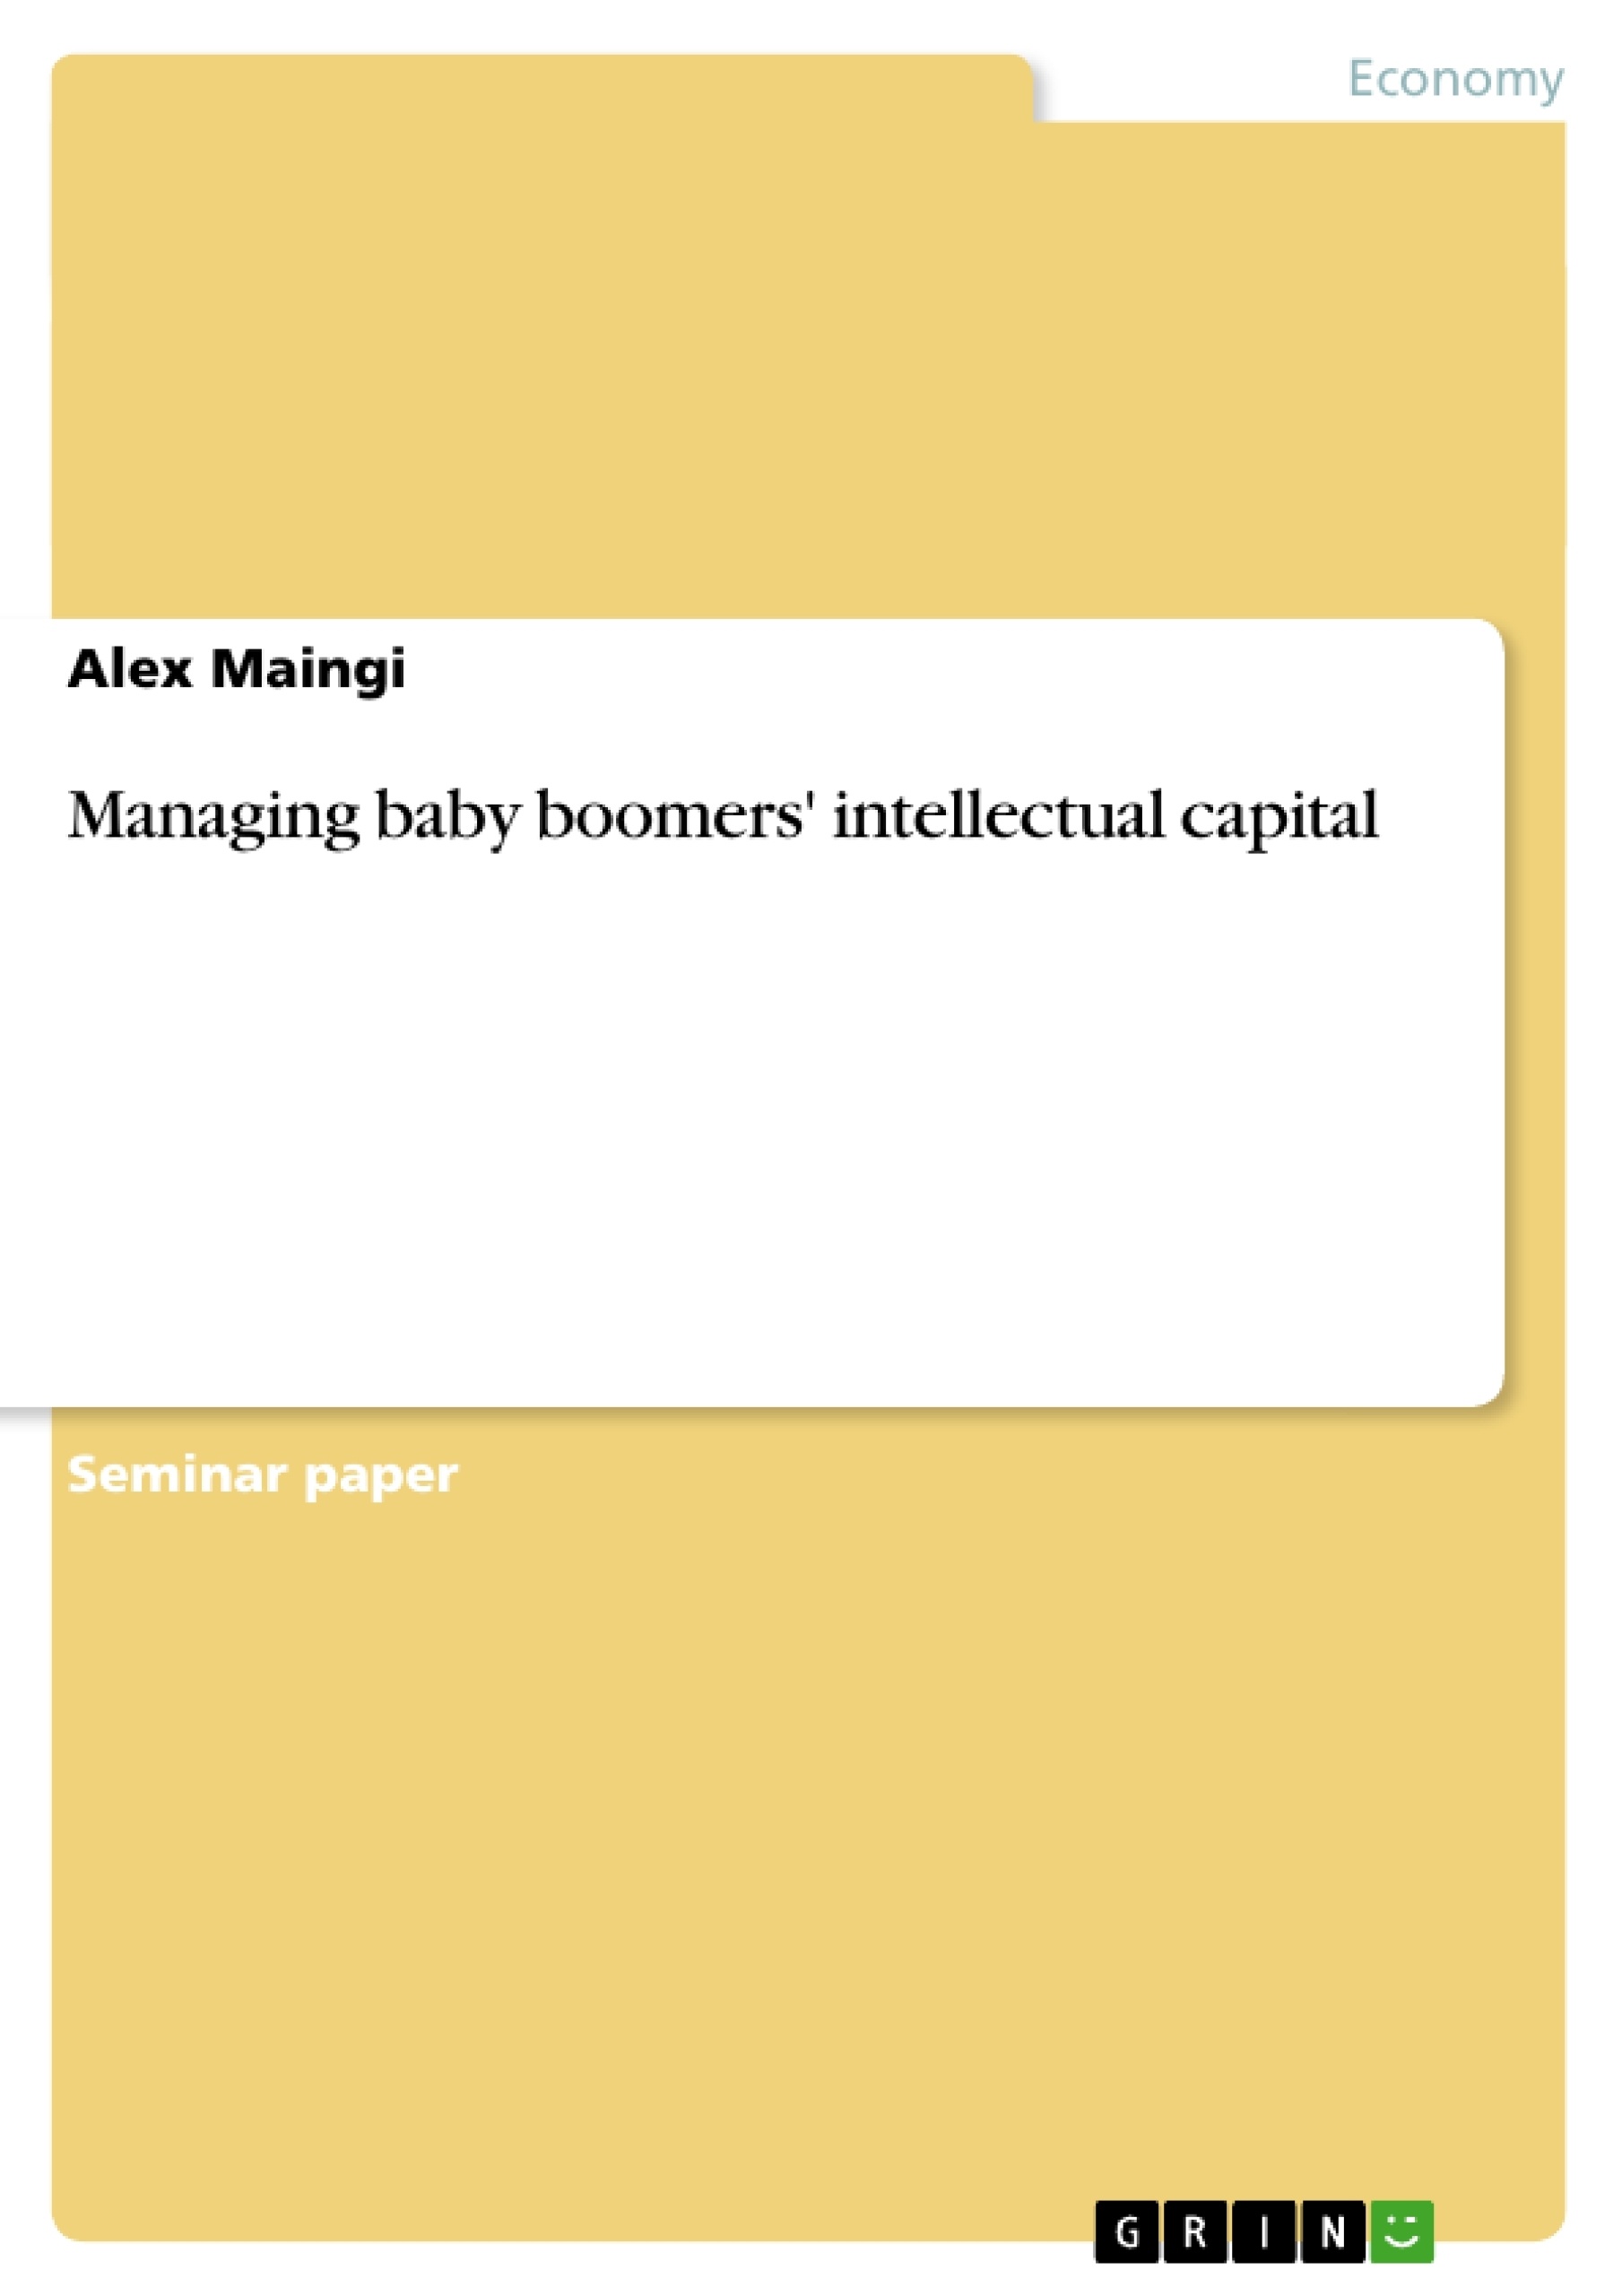 Title: Managing baby boomers' intellectual capital